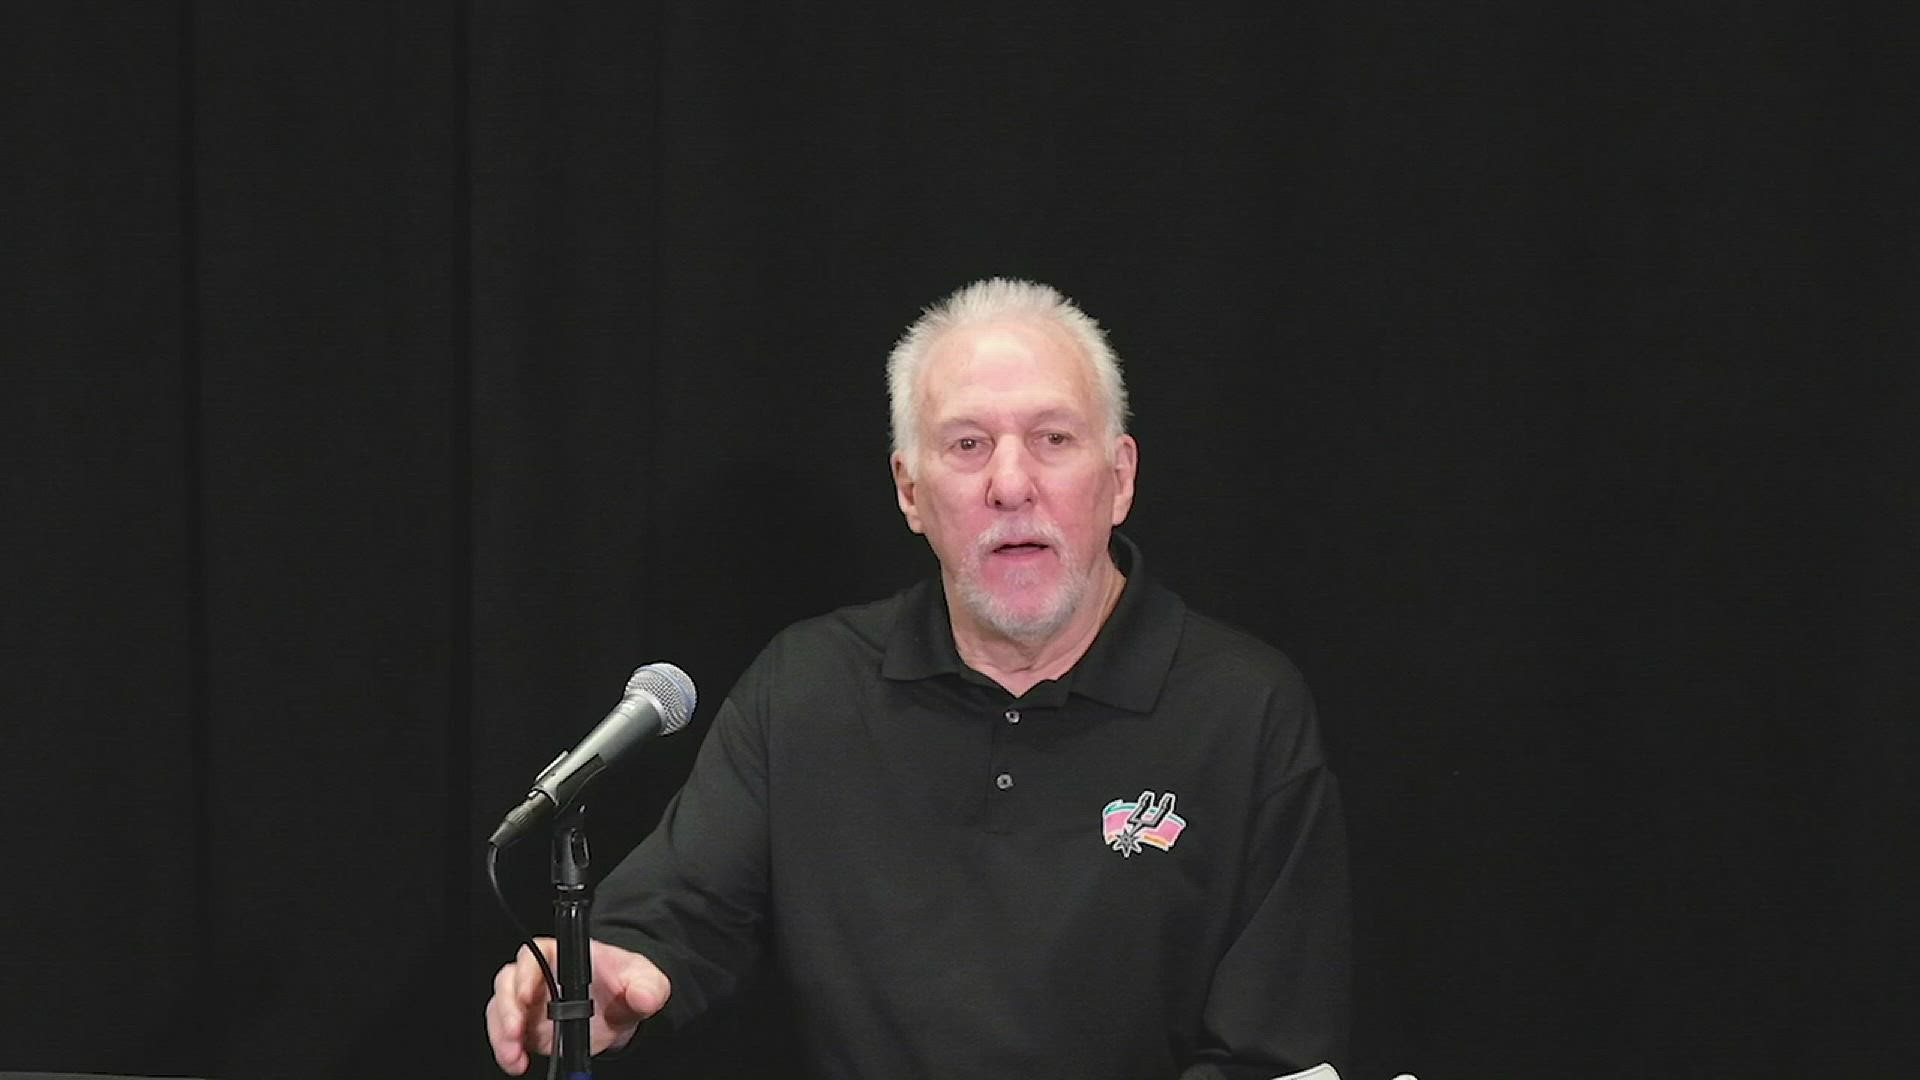 Pop said he was happy for Patty Mills, LaMarcus Aldridge, and DeMar DeRozan, and noted that the Spurs' young players needed more responsibility.